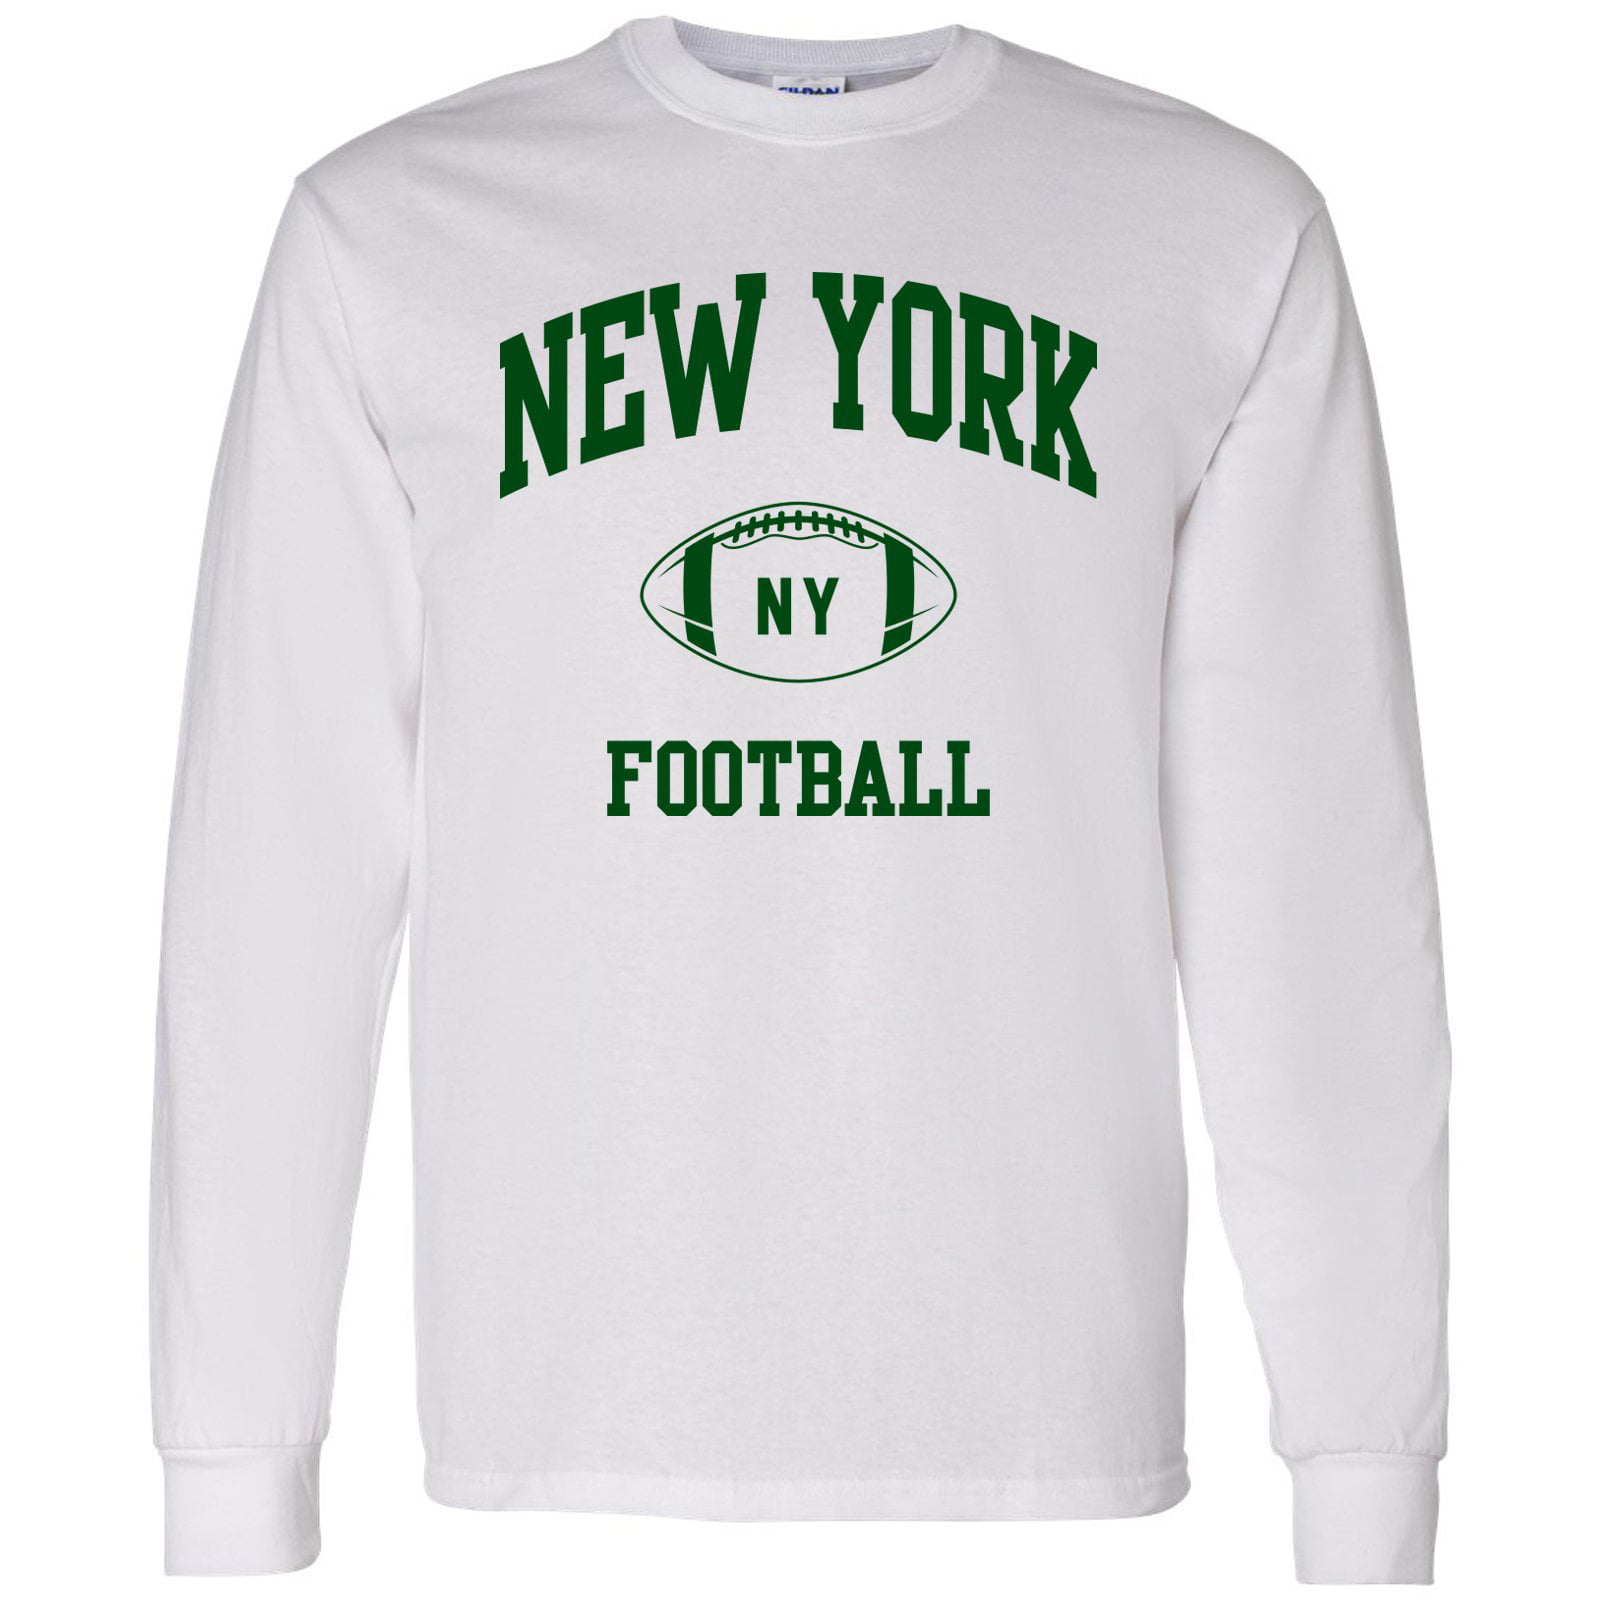 New York Classic Football Arch American Football Team Long Sleeve T Shirt -  2X-Large - White/Forest Print 